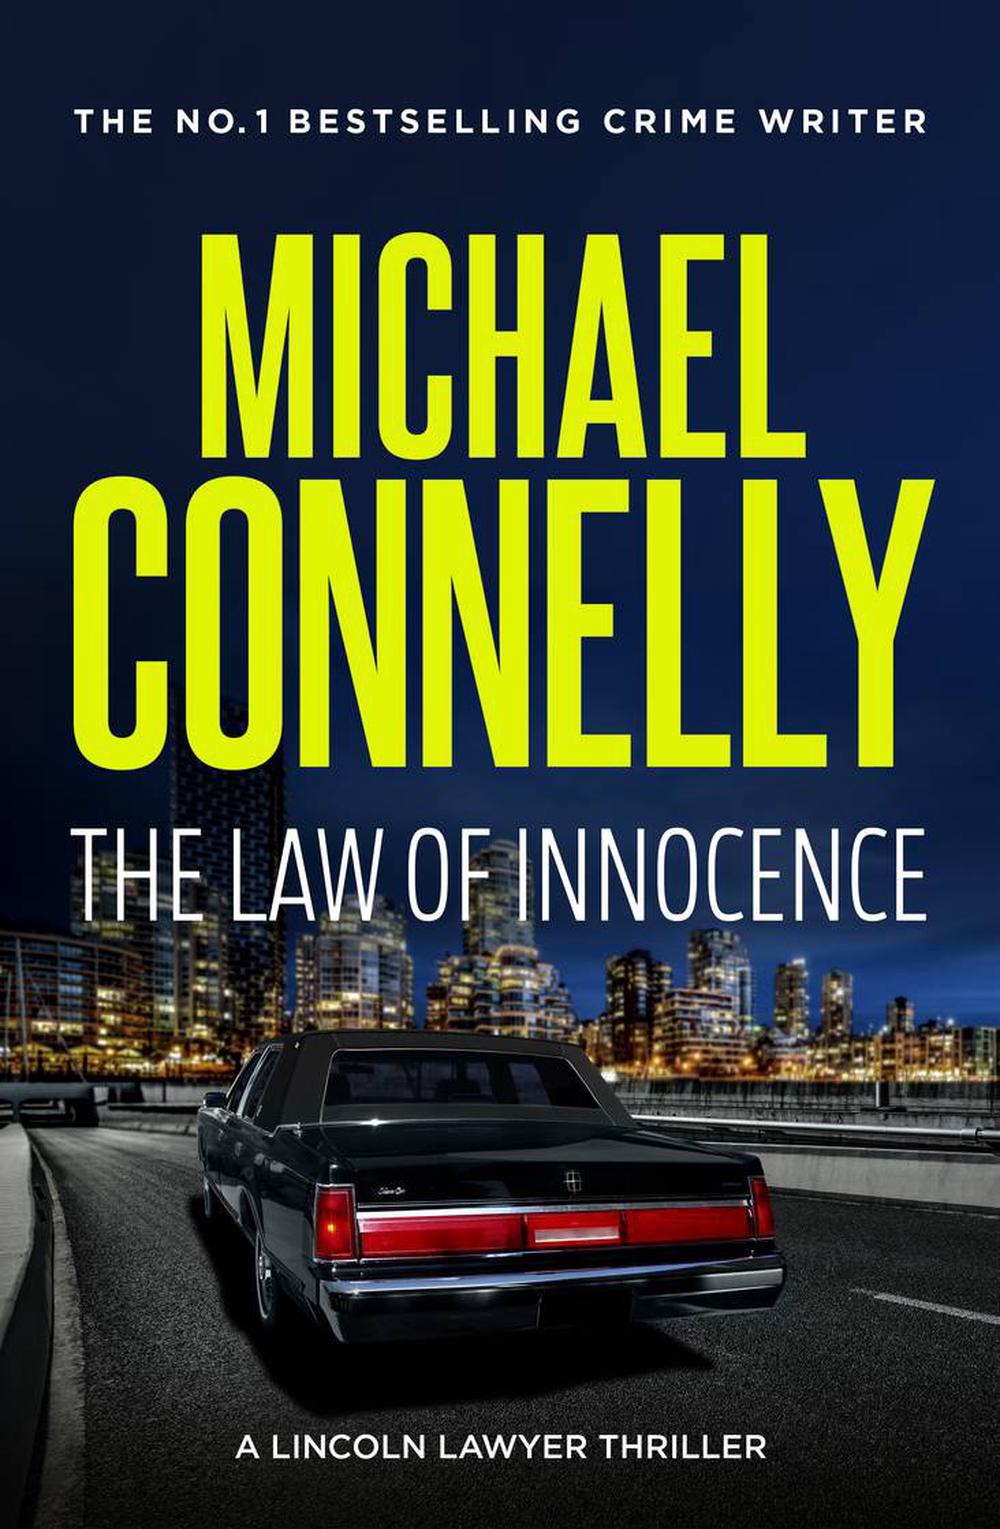 the law of innocence book